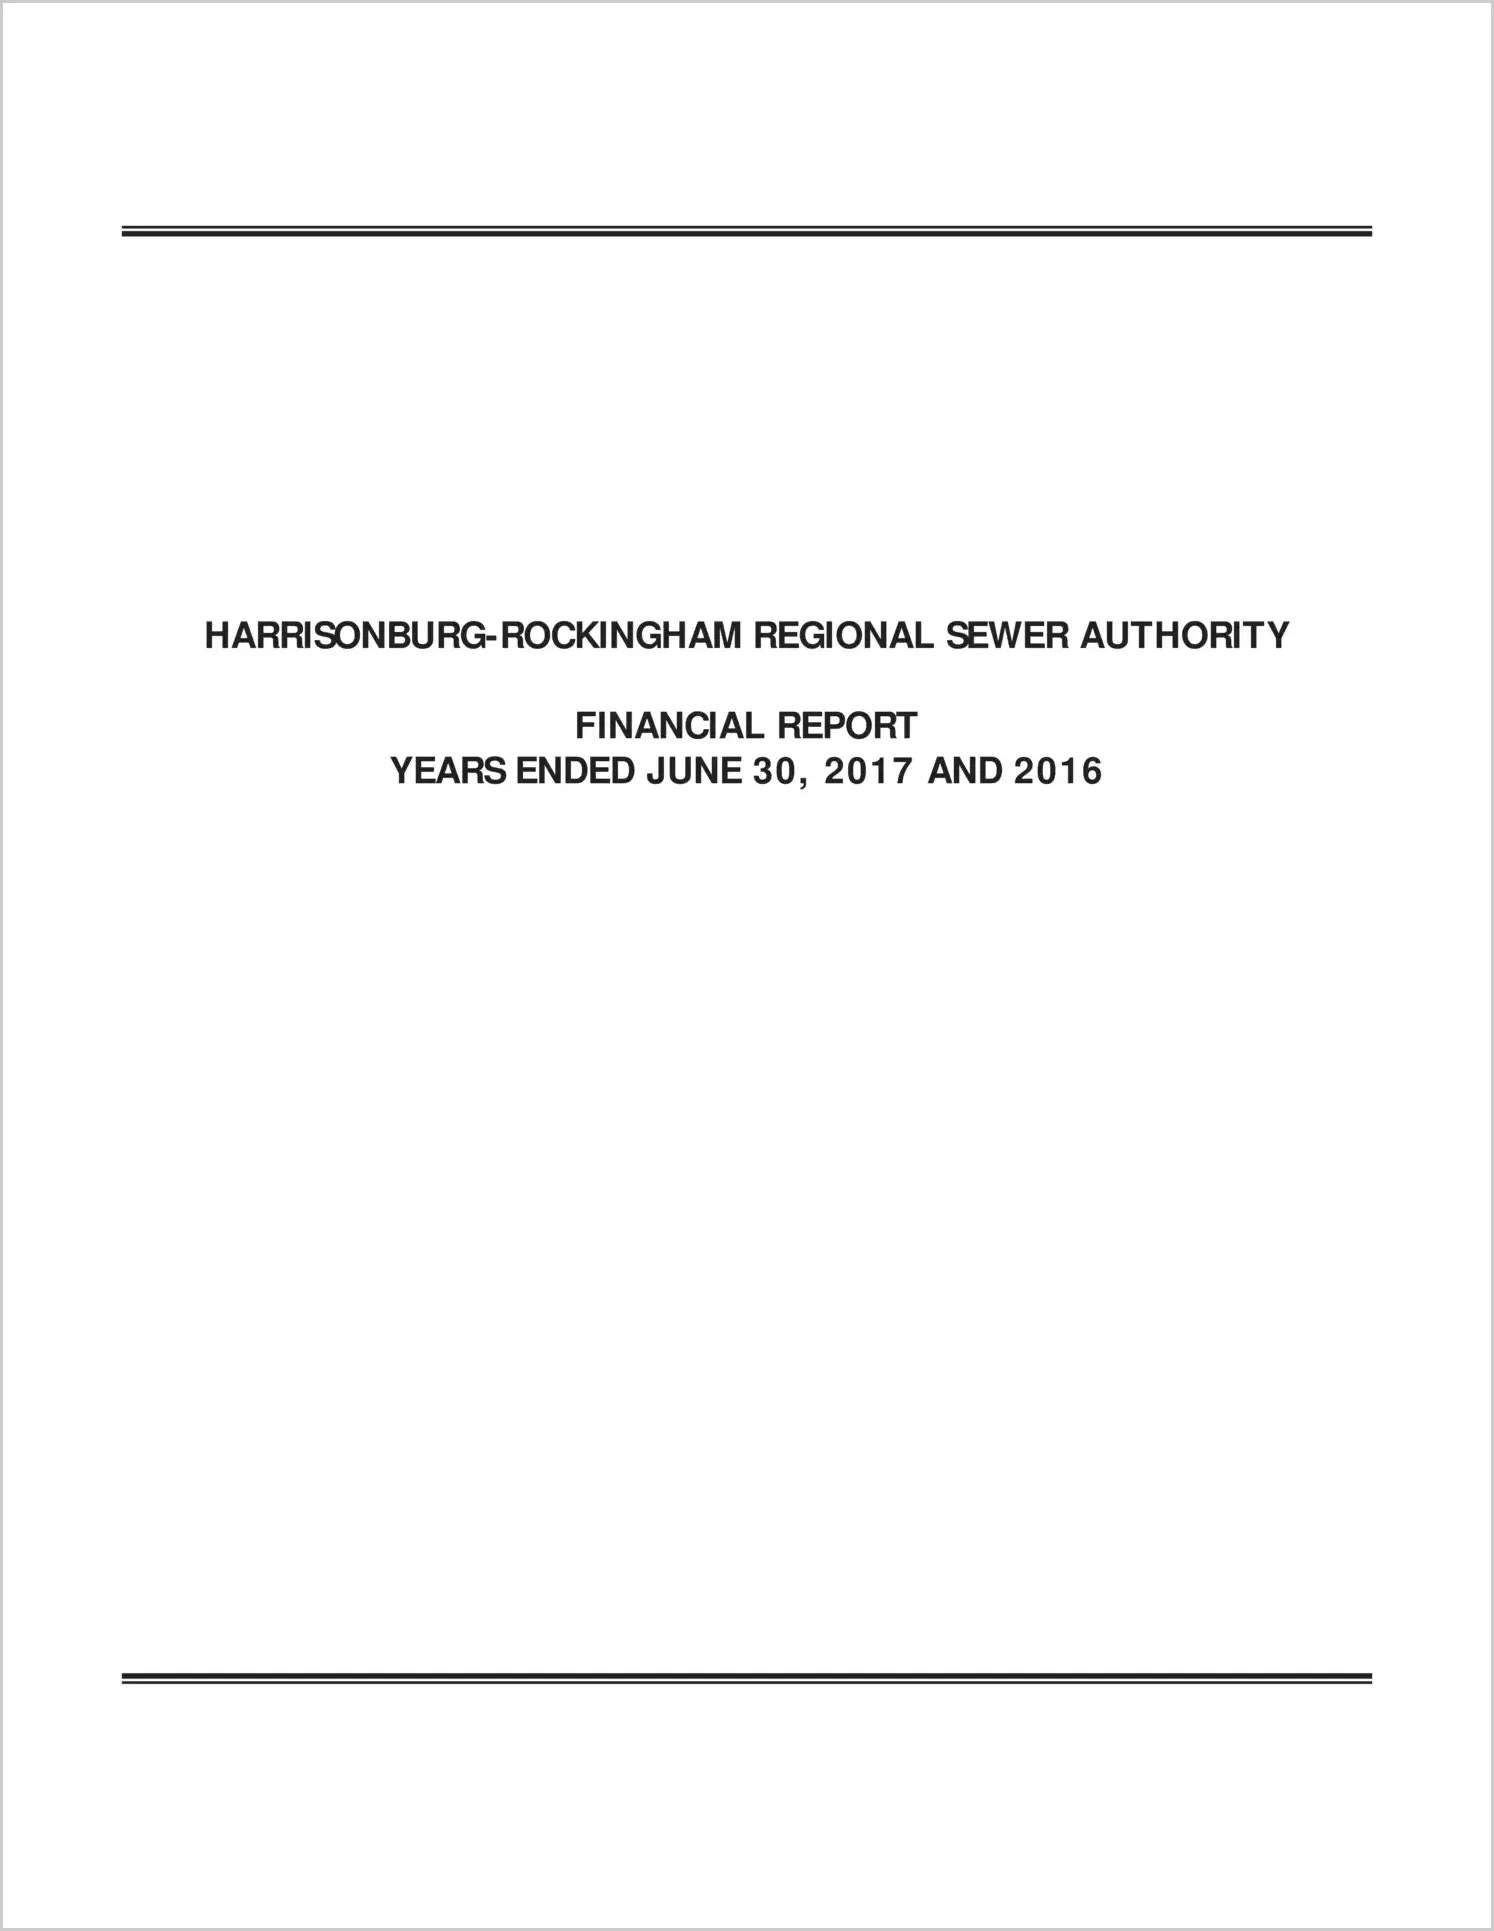 2017 ABC/Other Annual Financial Report  for Harrisonburg-Rockingham Regional Sewer Authority